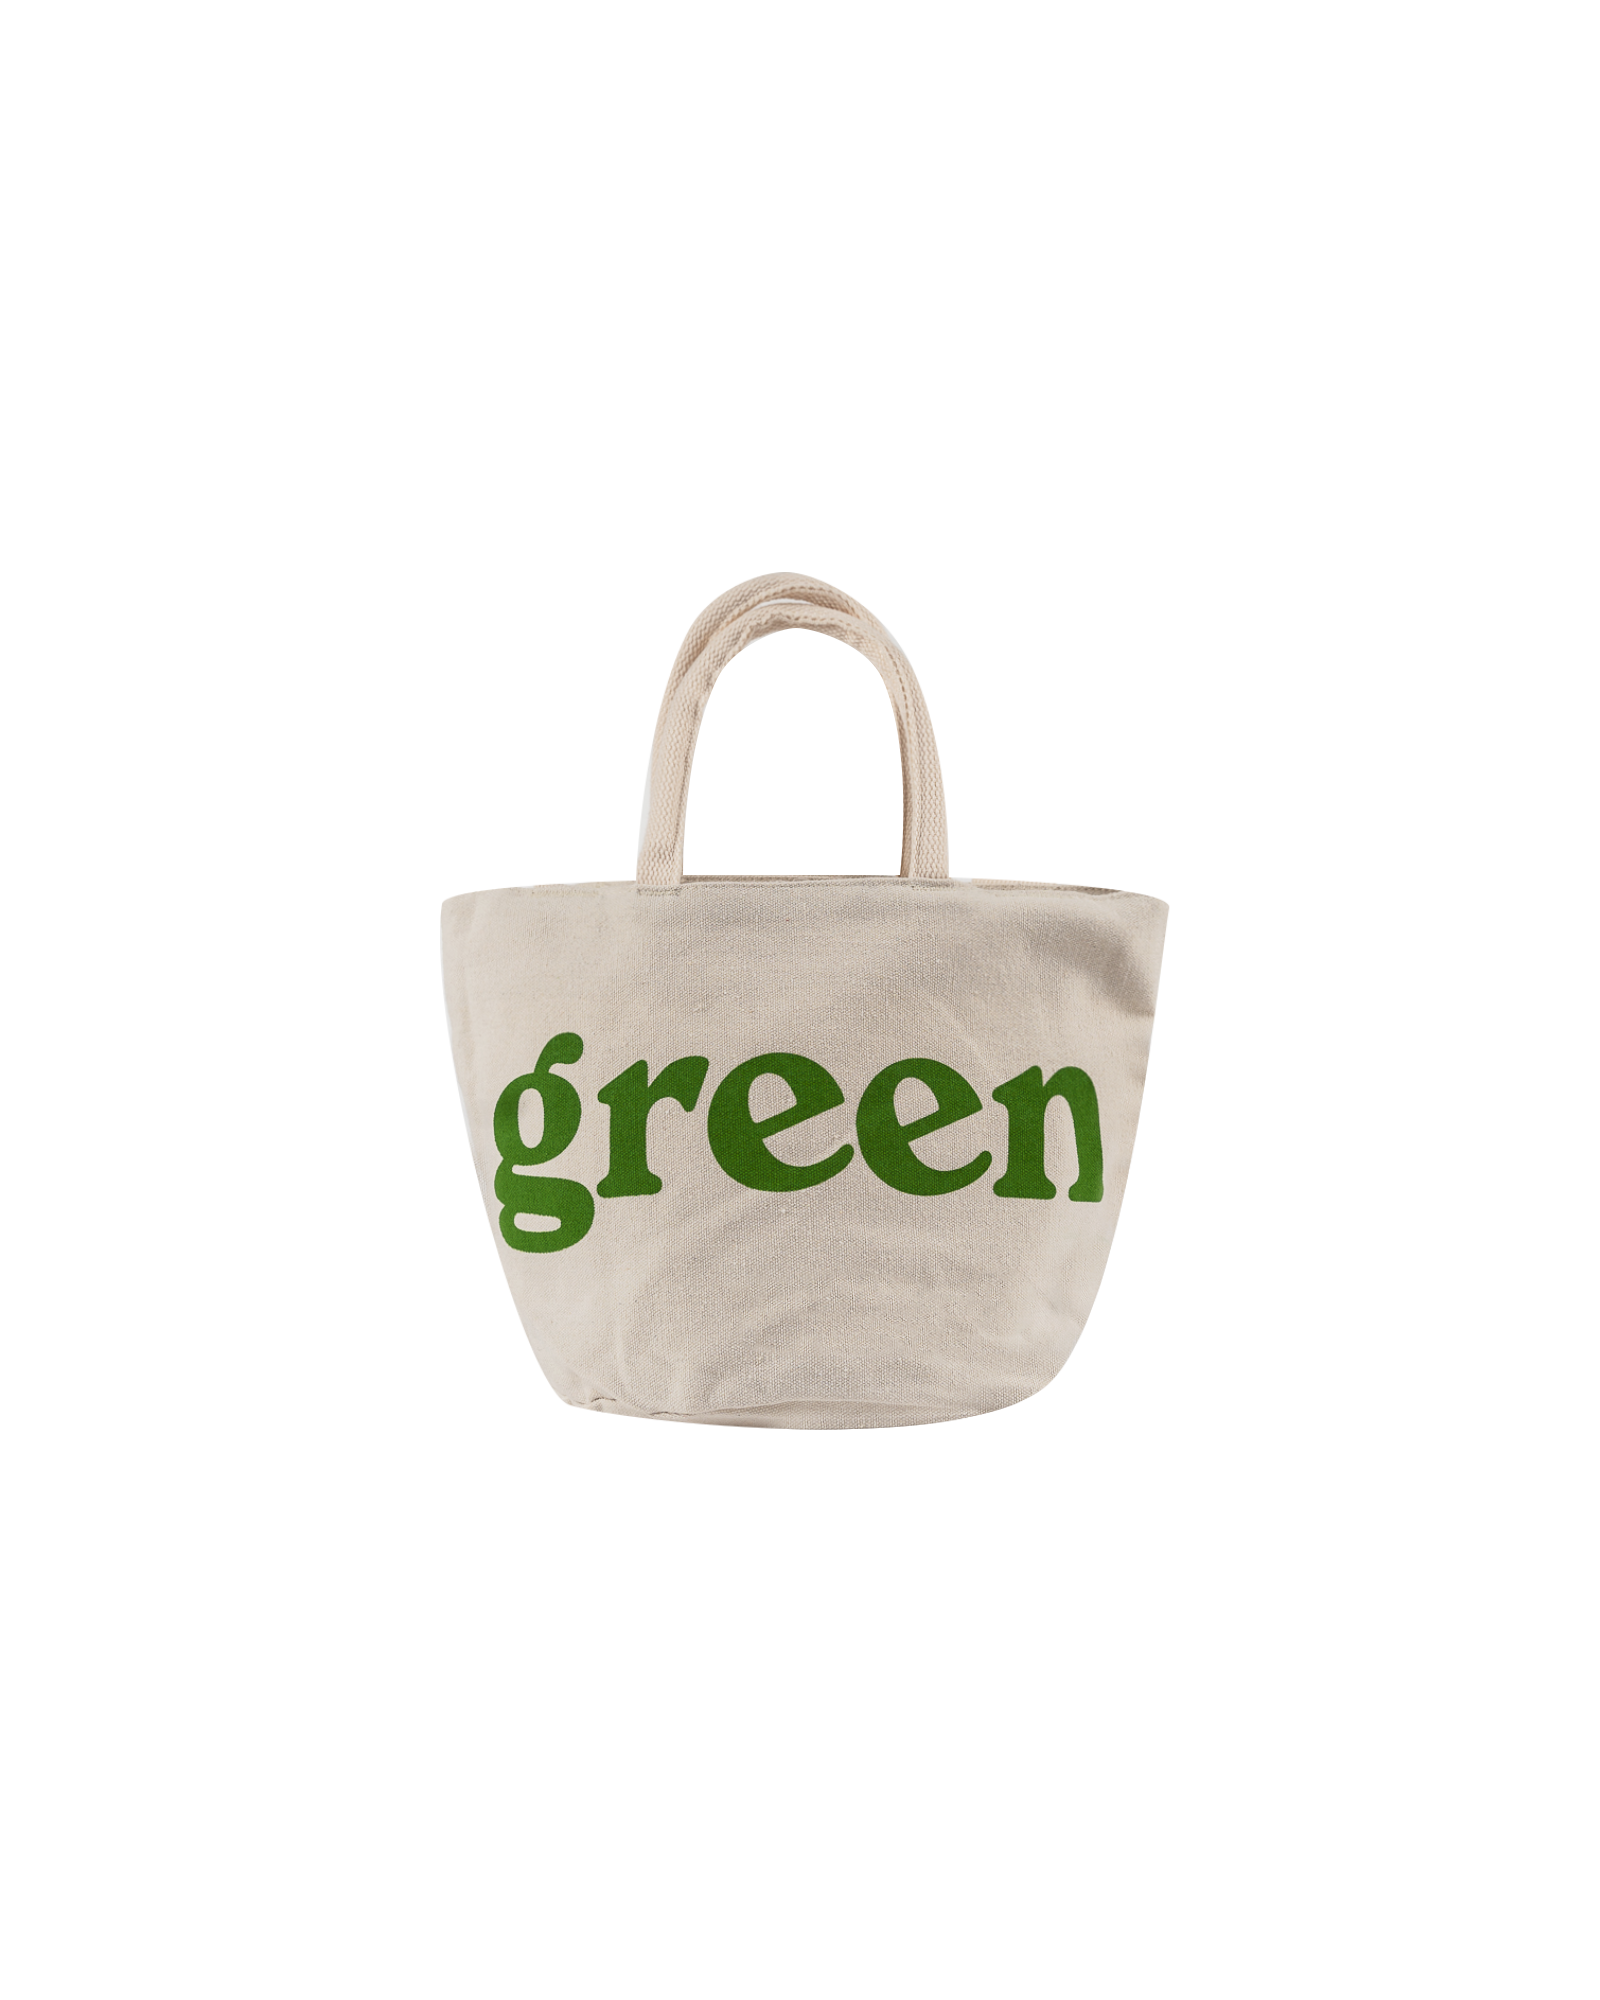 Mister Green - Accessory - Small Grow Bag/Tote - V2 - Natural